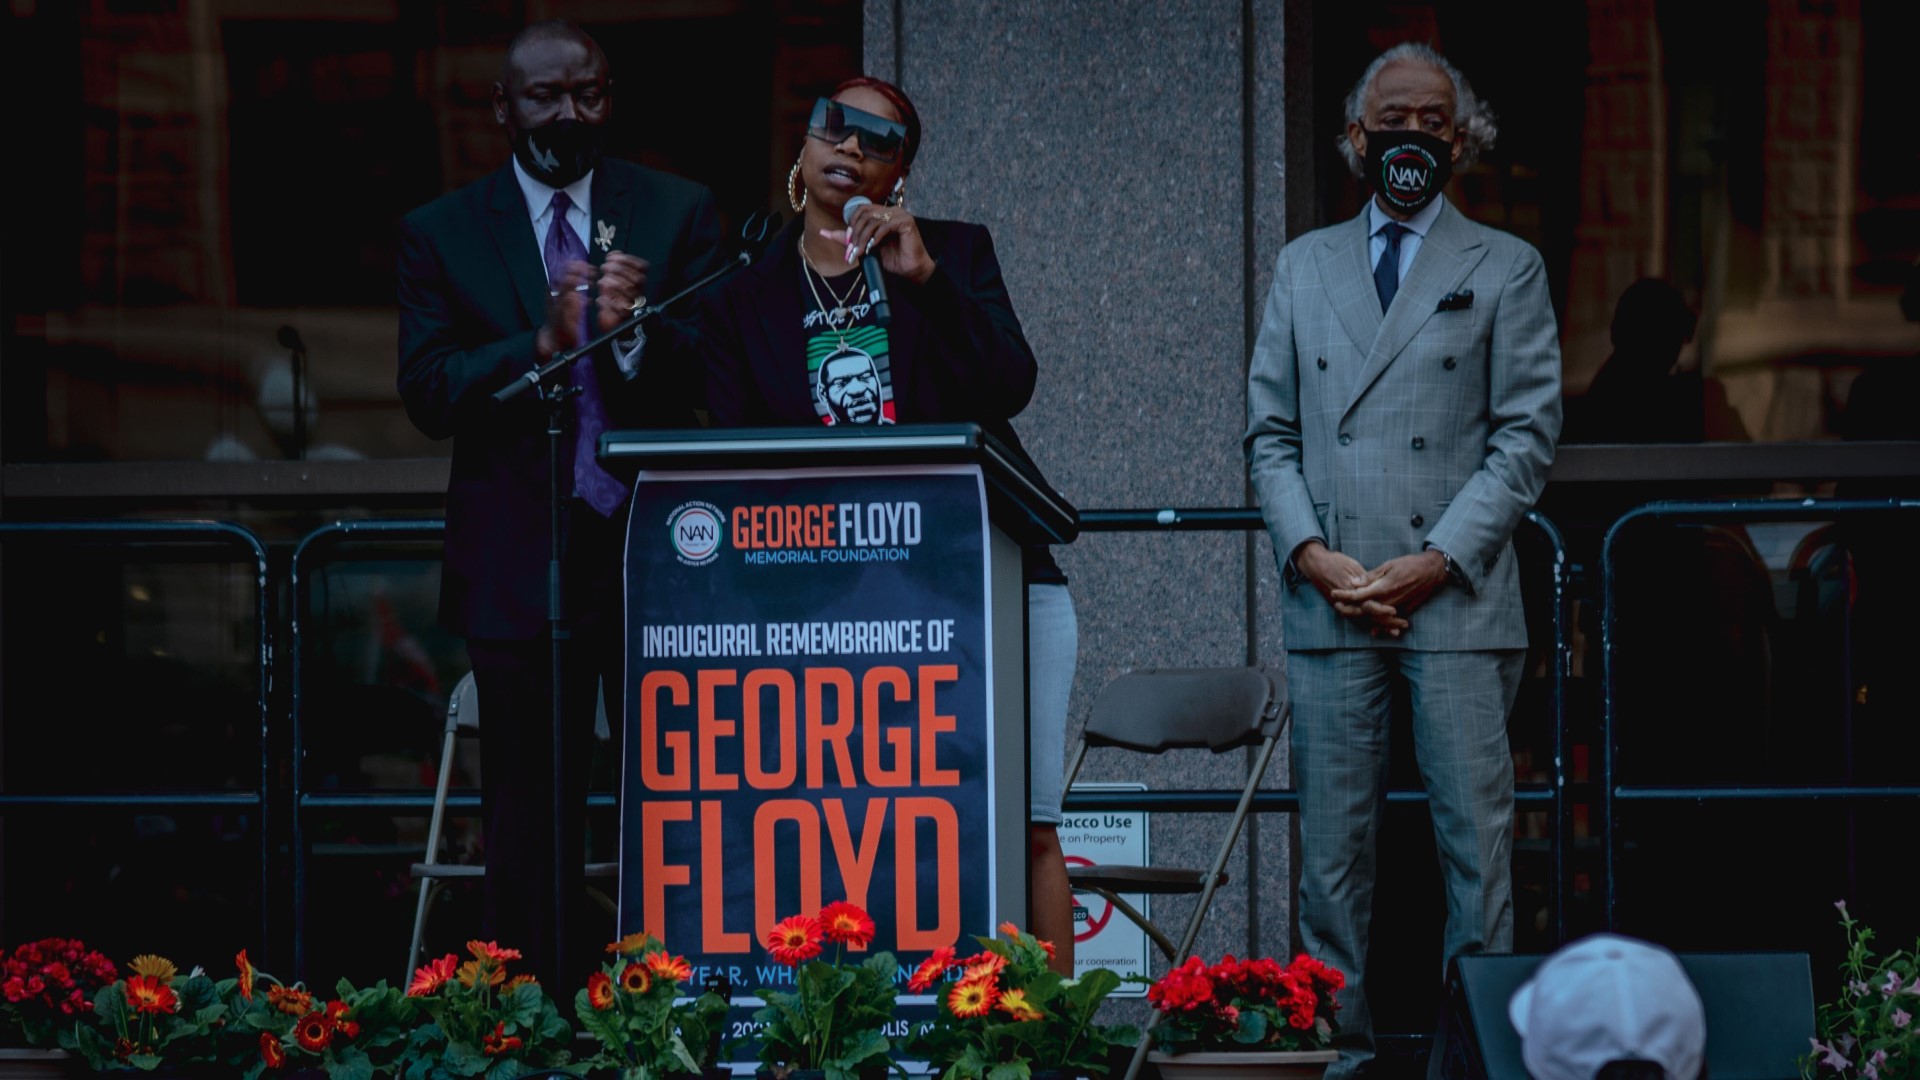 George Floyd's family was joined at the memorial rally by attorney Ben Crump and prominent civil rights leader Rev. Al Sharpton.